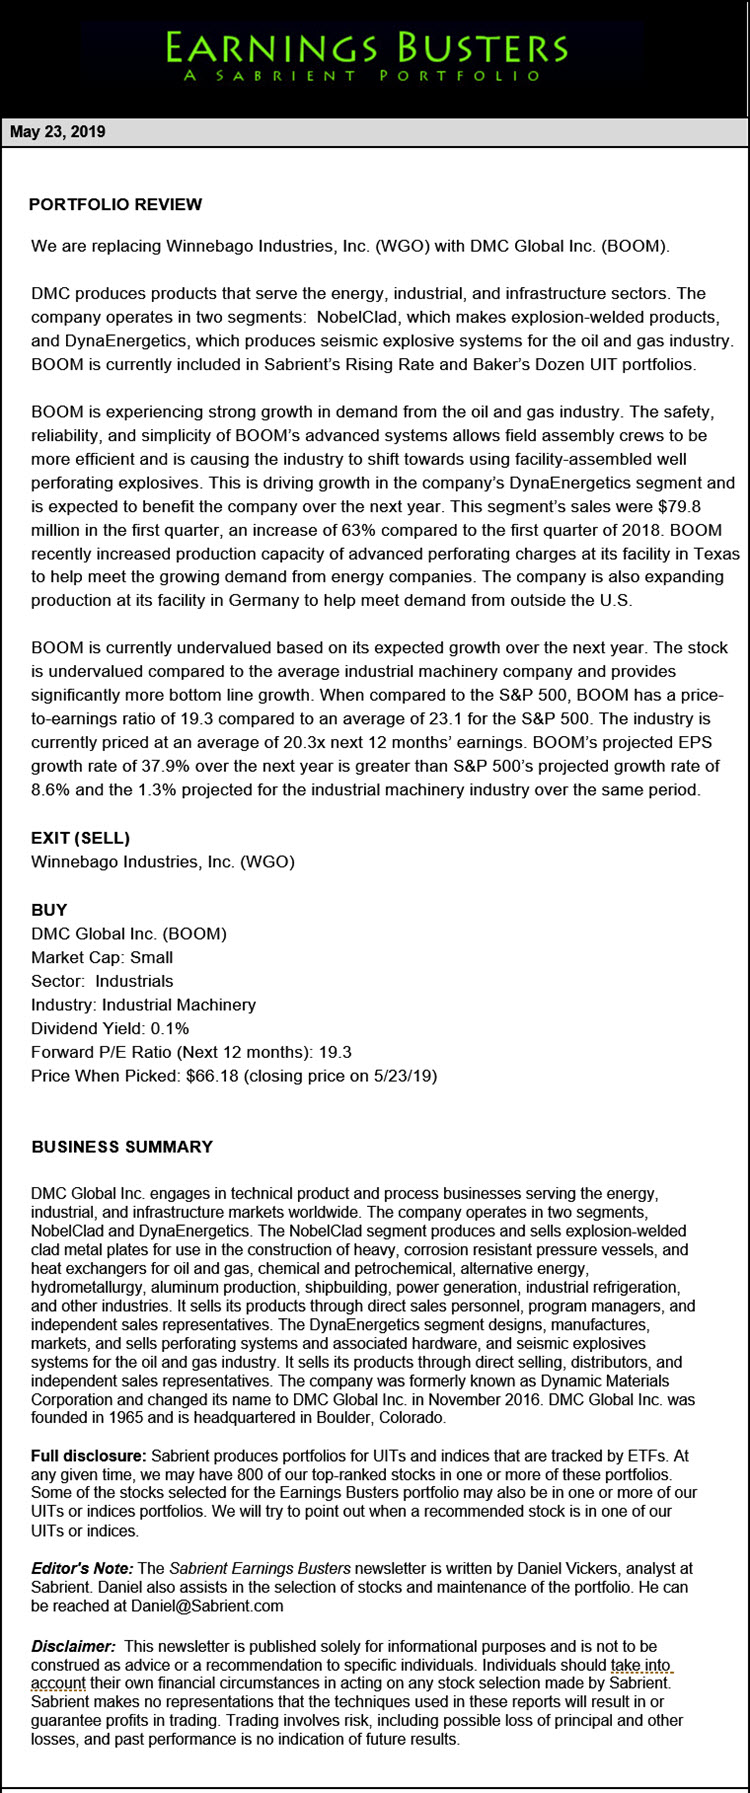 Earnings Busters Newsletter - May 23, 2019